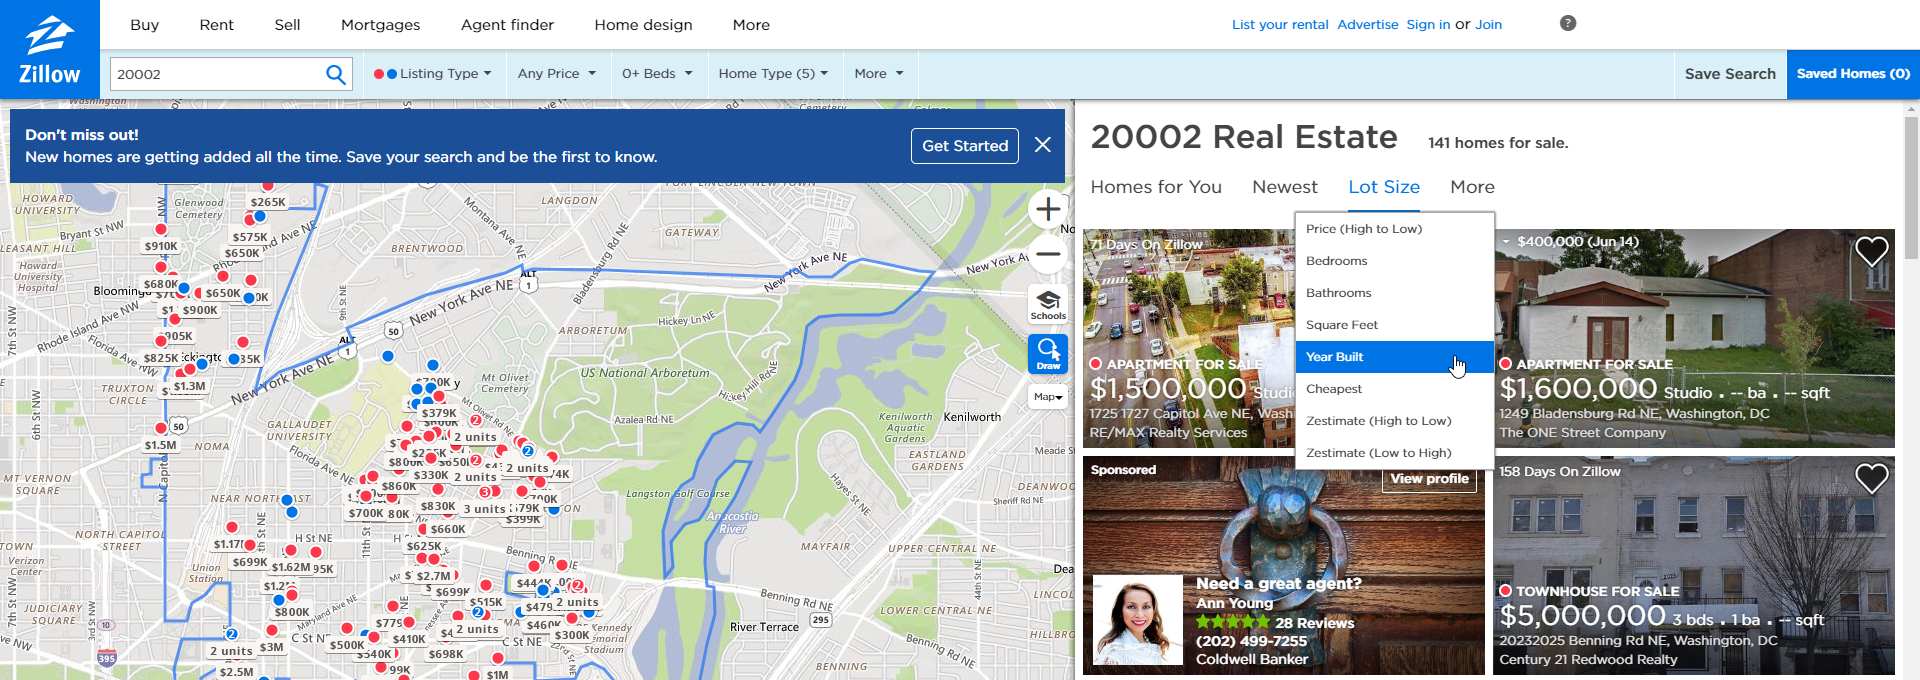 Property filter on Zillow